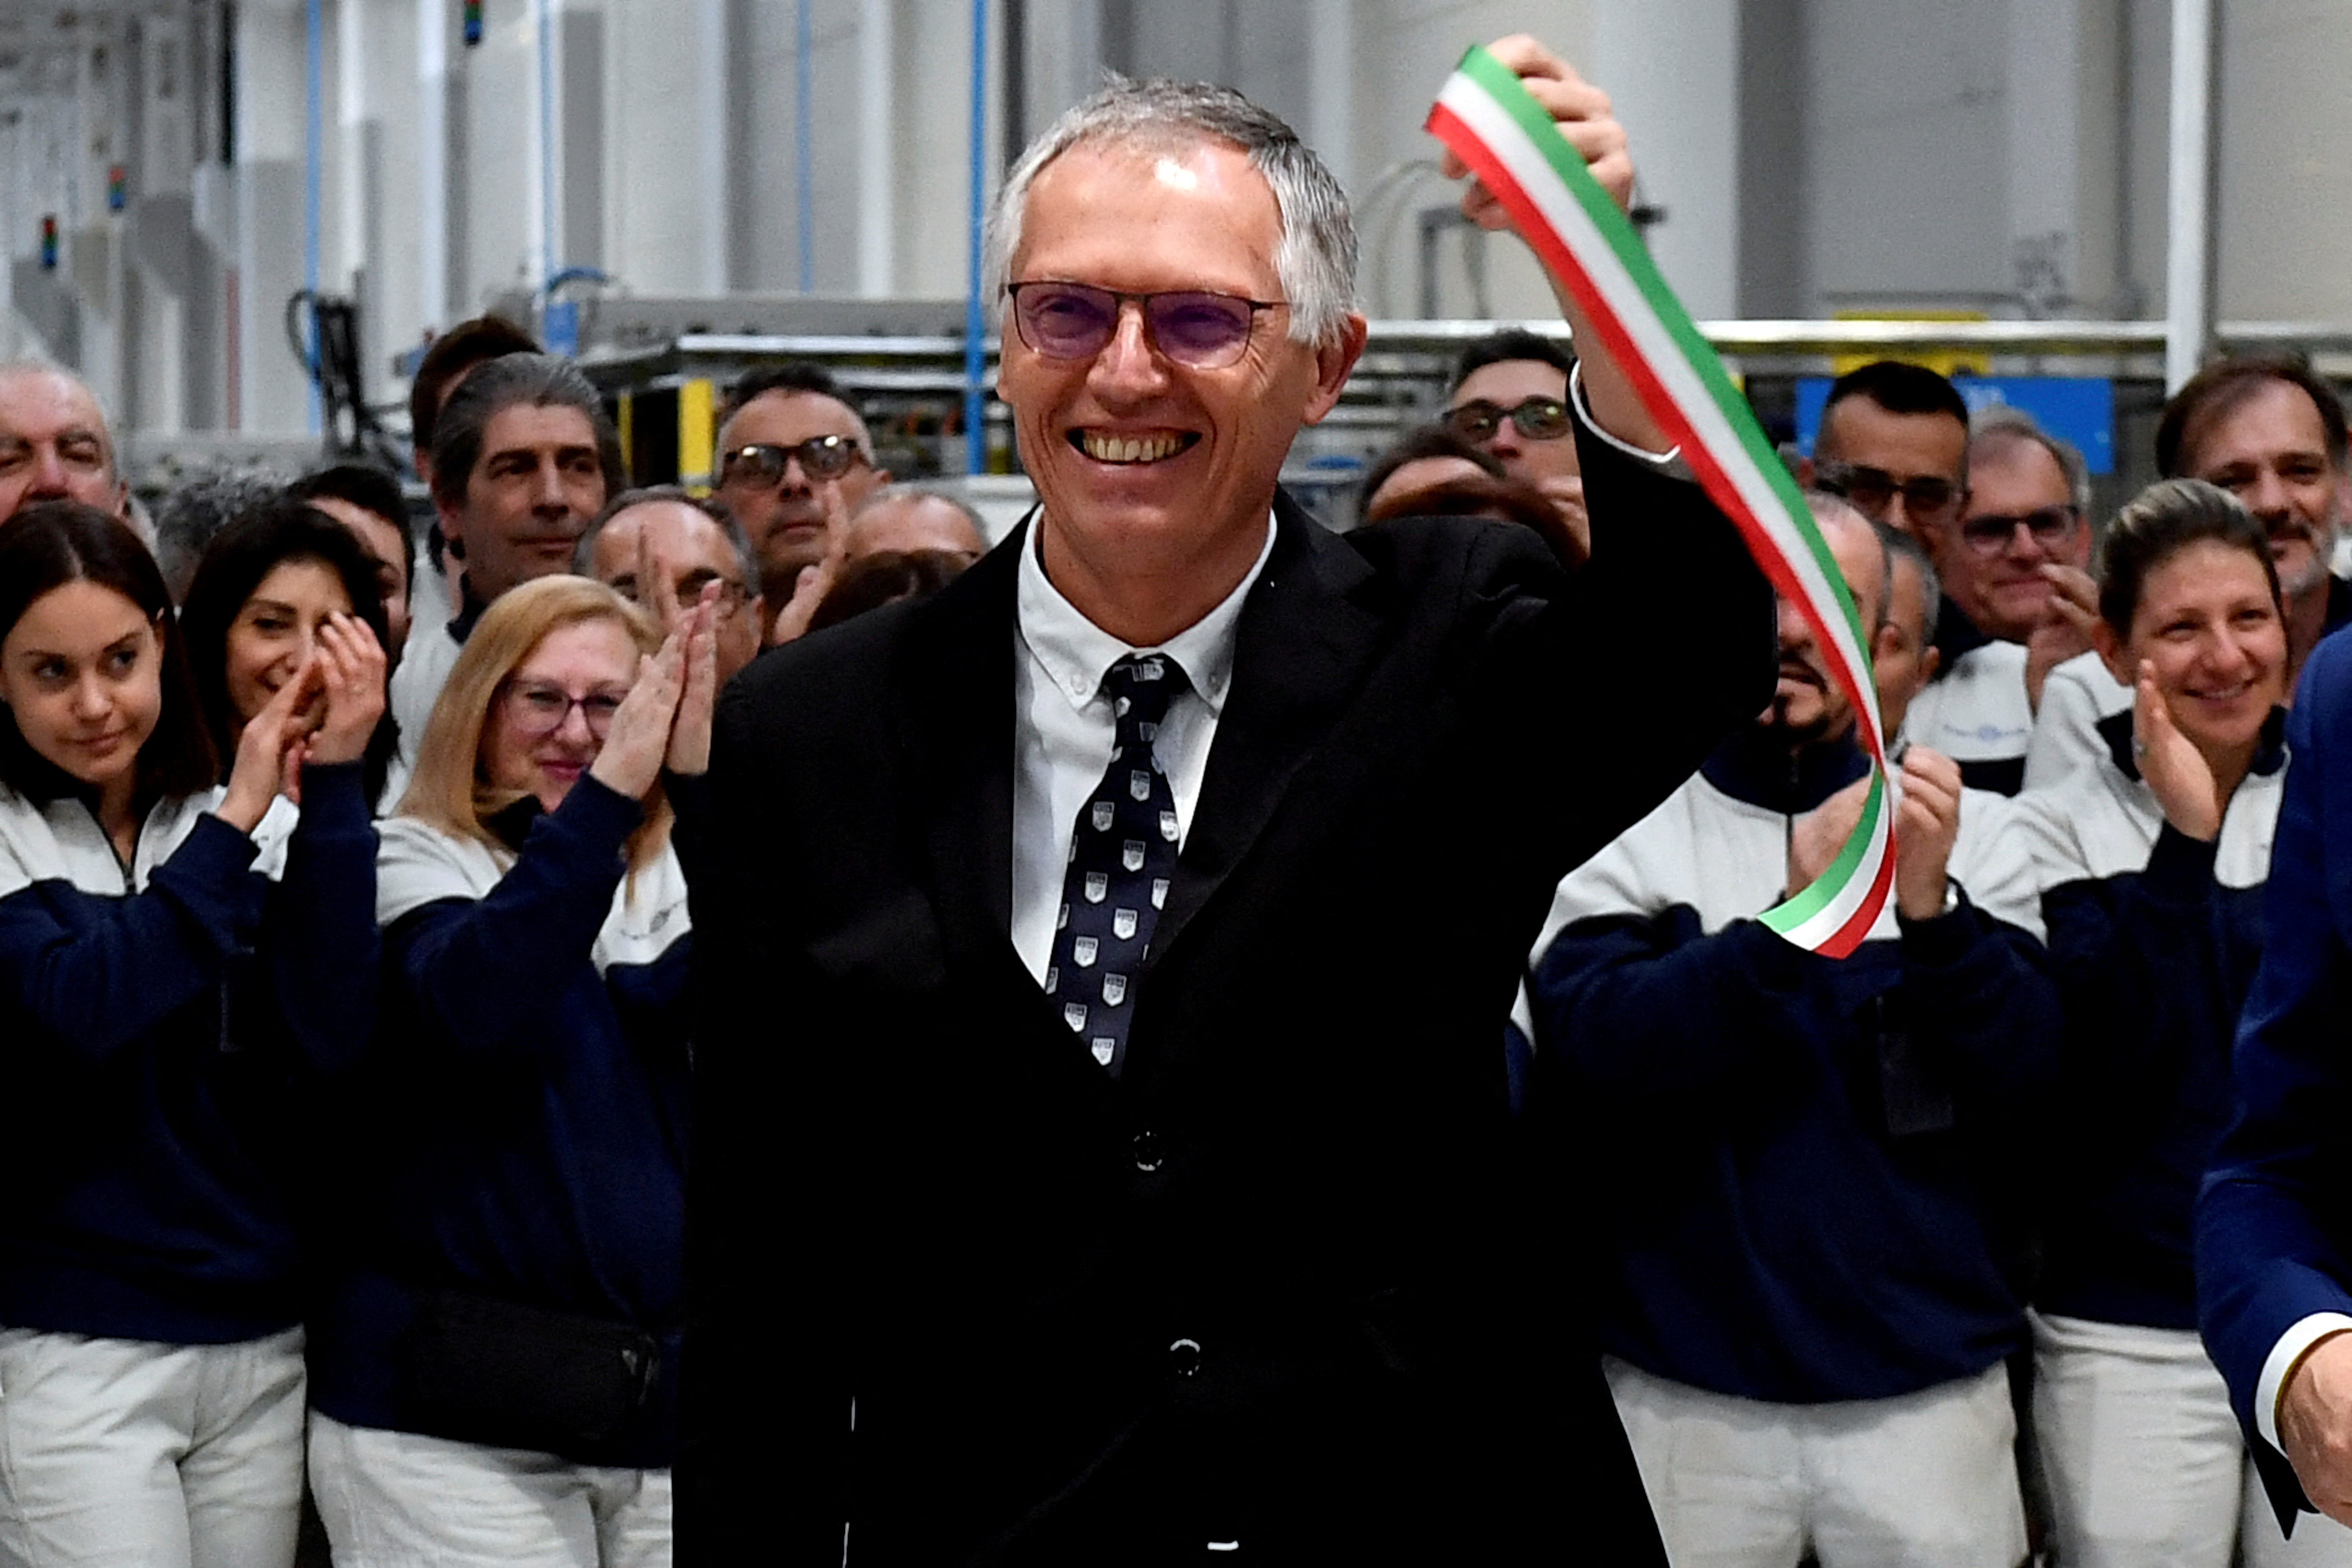 Stellantis CEO Carlos Tavares inaugurates the group's new electrified dual-clutch transmission (eDCT) assembly facility in the Mirafiori complex in Turin